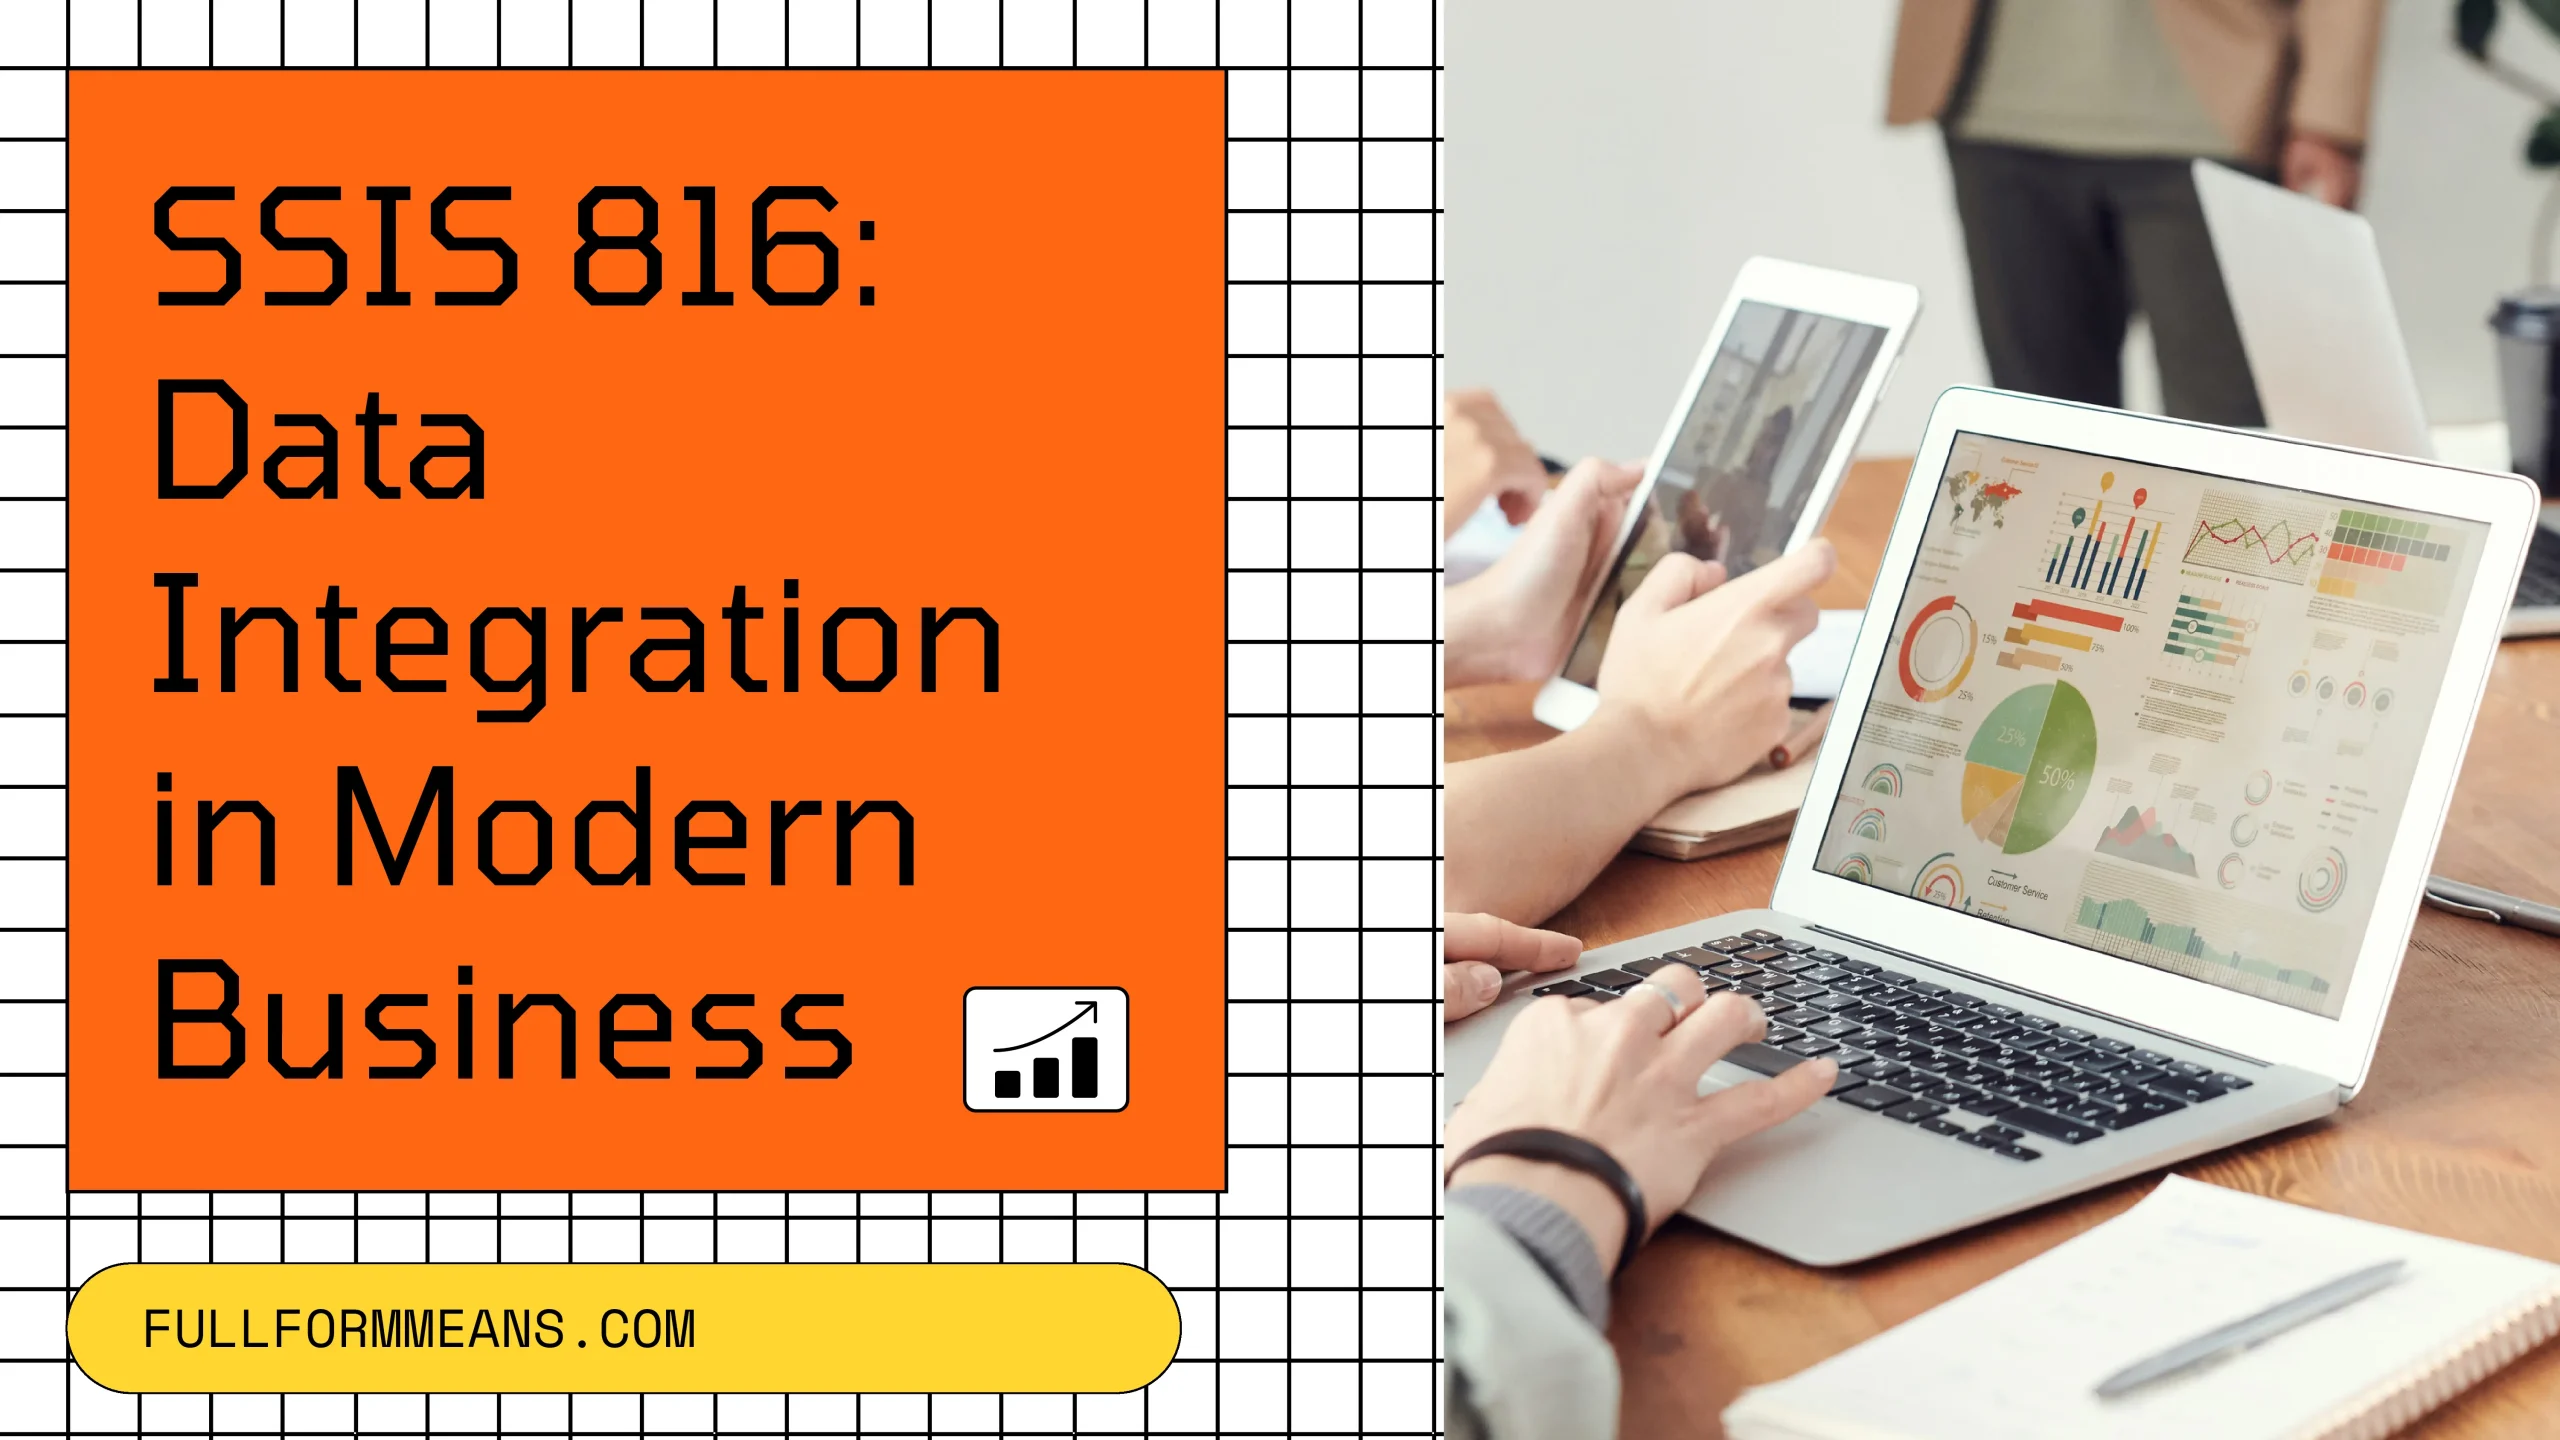 SSIS 816: Data Integration in Modern Business